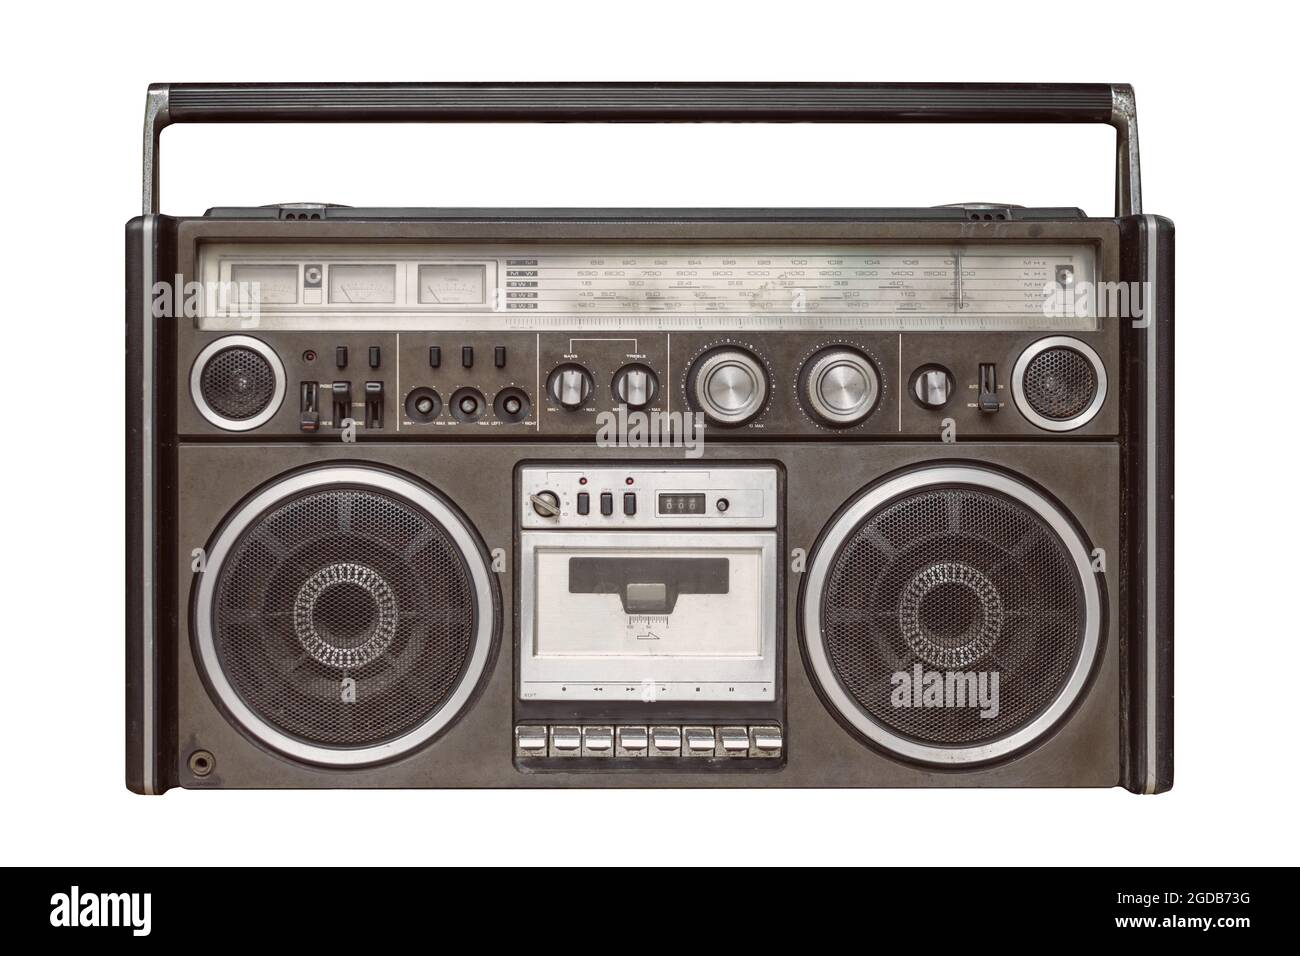 Old radio AM FM front face cassette tape player isolated on white background with clipping path. Stock Photo